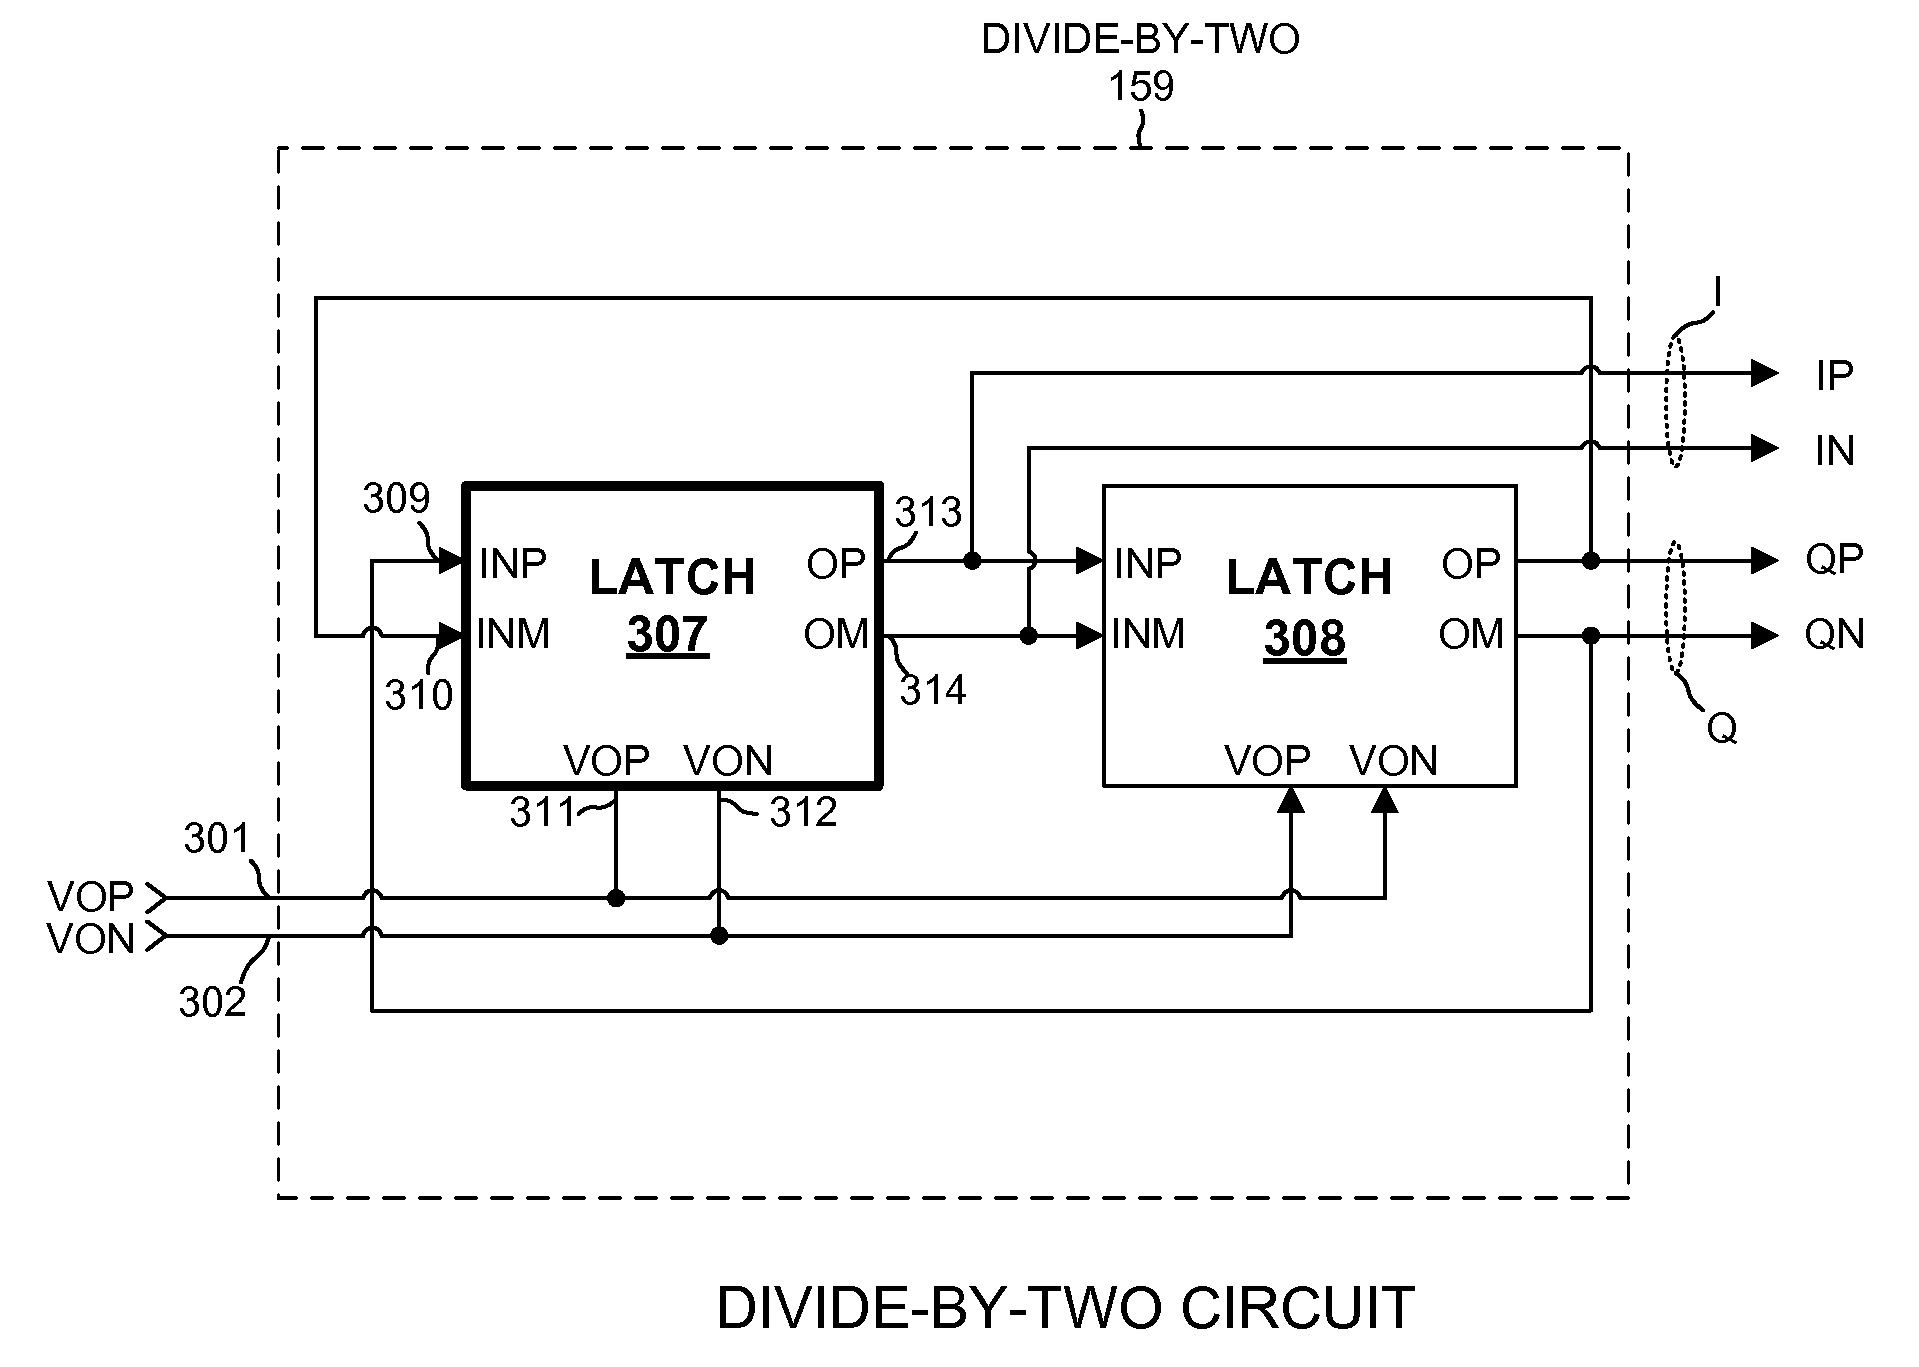 Lo generation and distribution in a multi-band transceiver